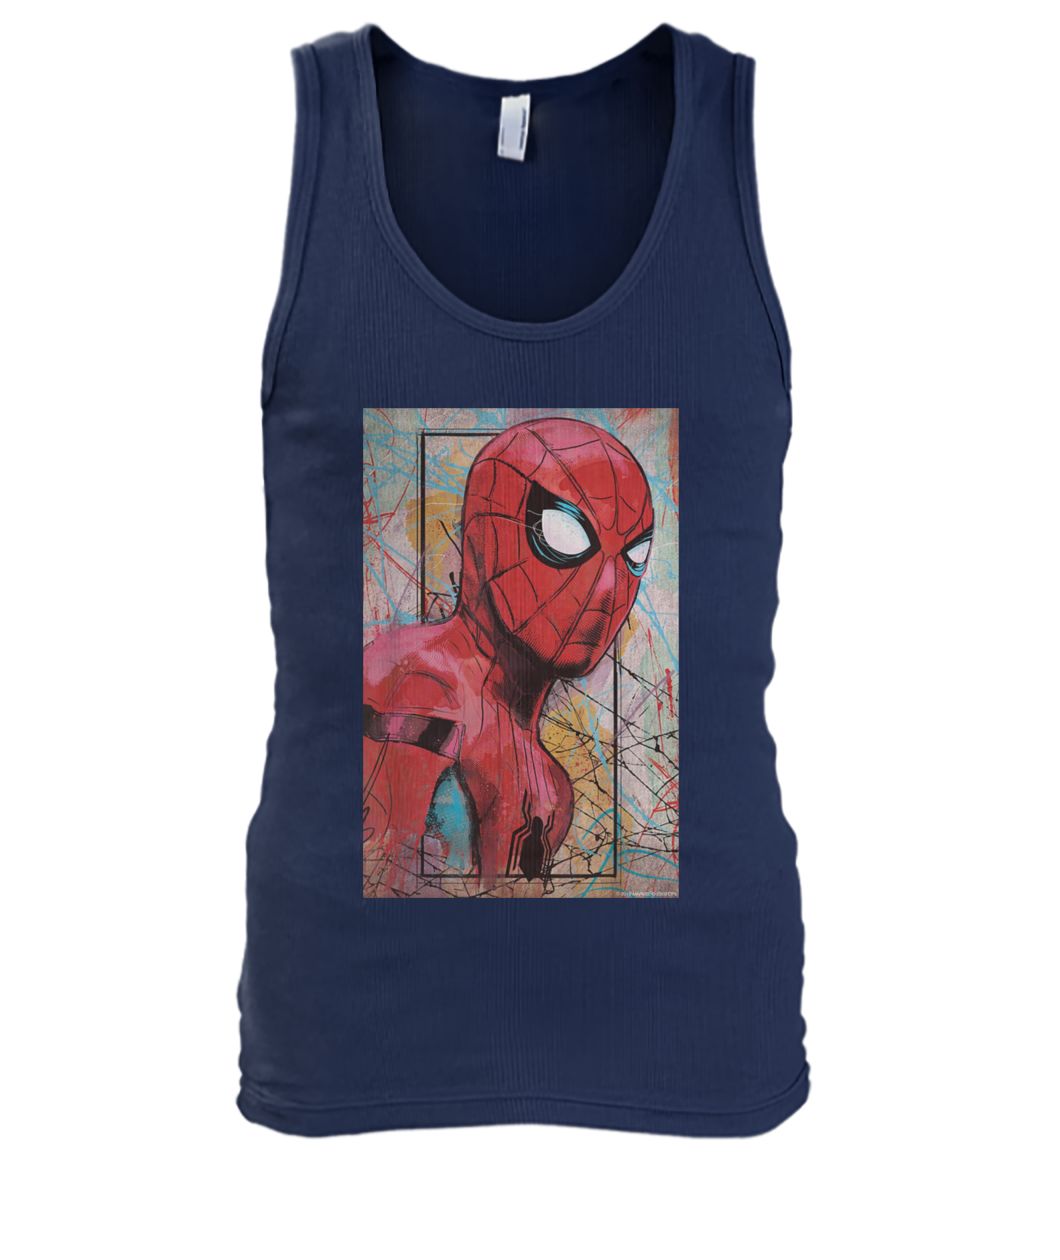 Marvel spider-man far from home poster men's tank top